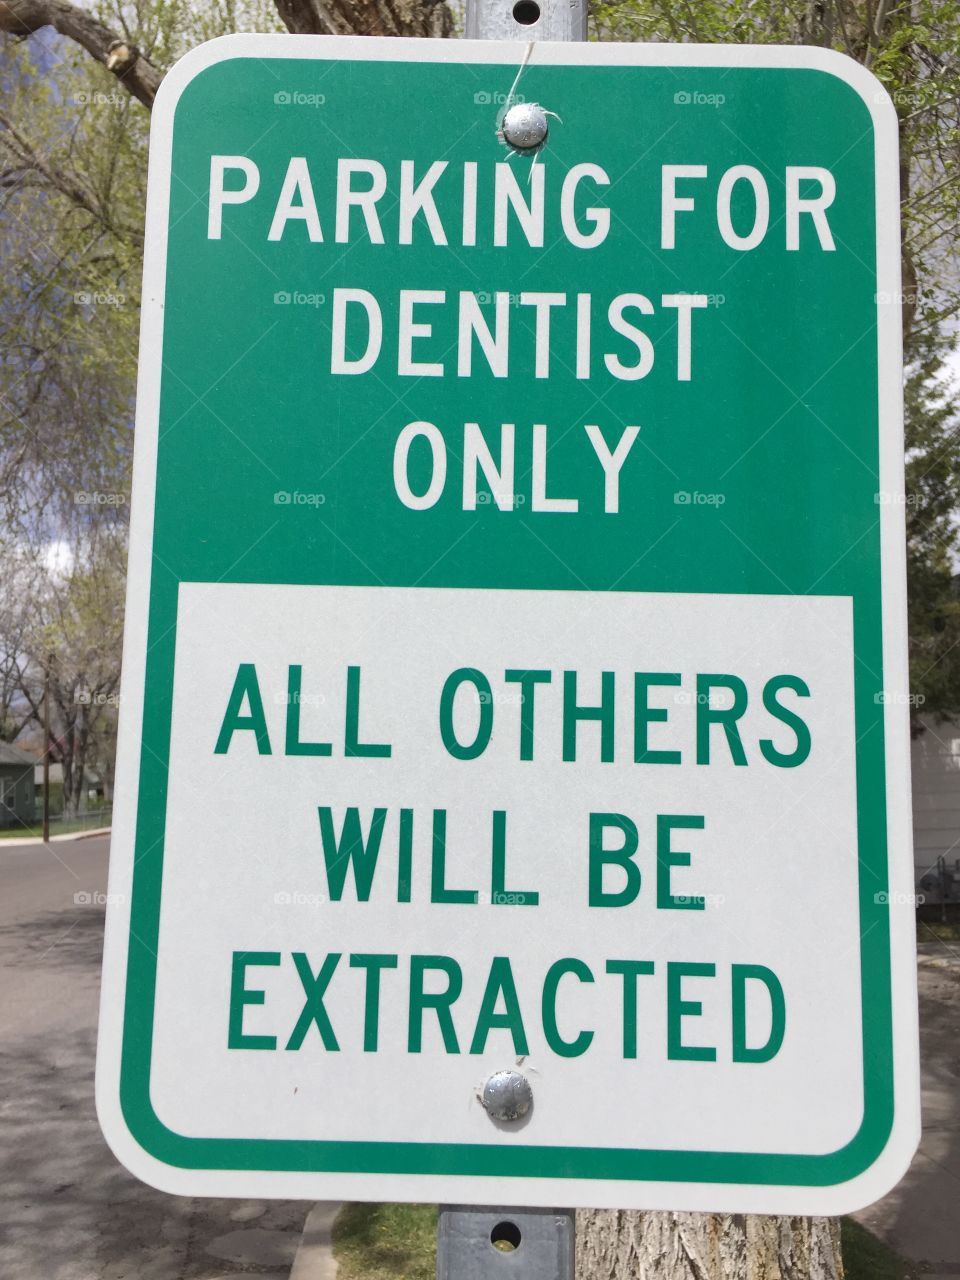 Funny sign. Parking for dentist only, all others will be extracted. Green and white.